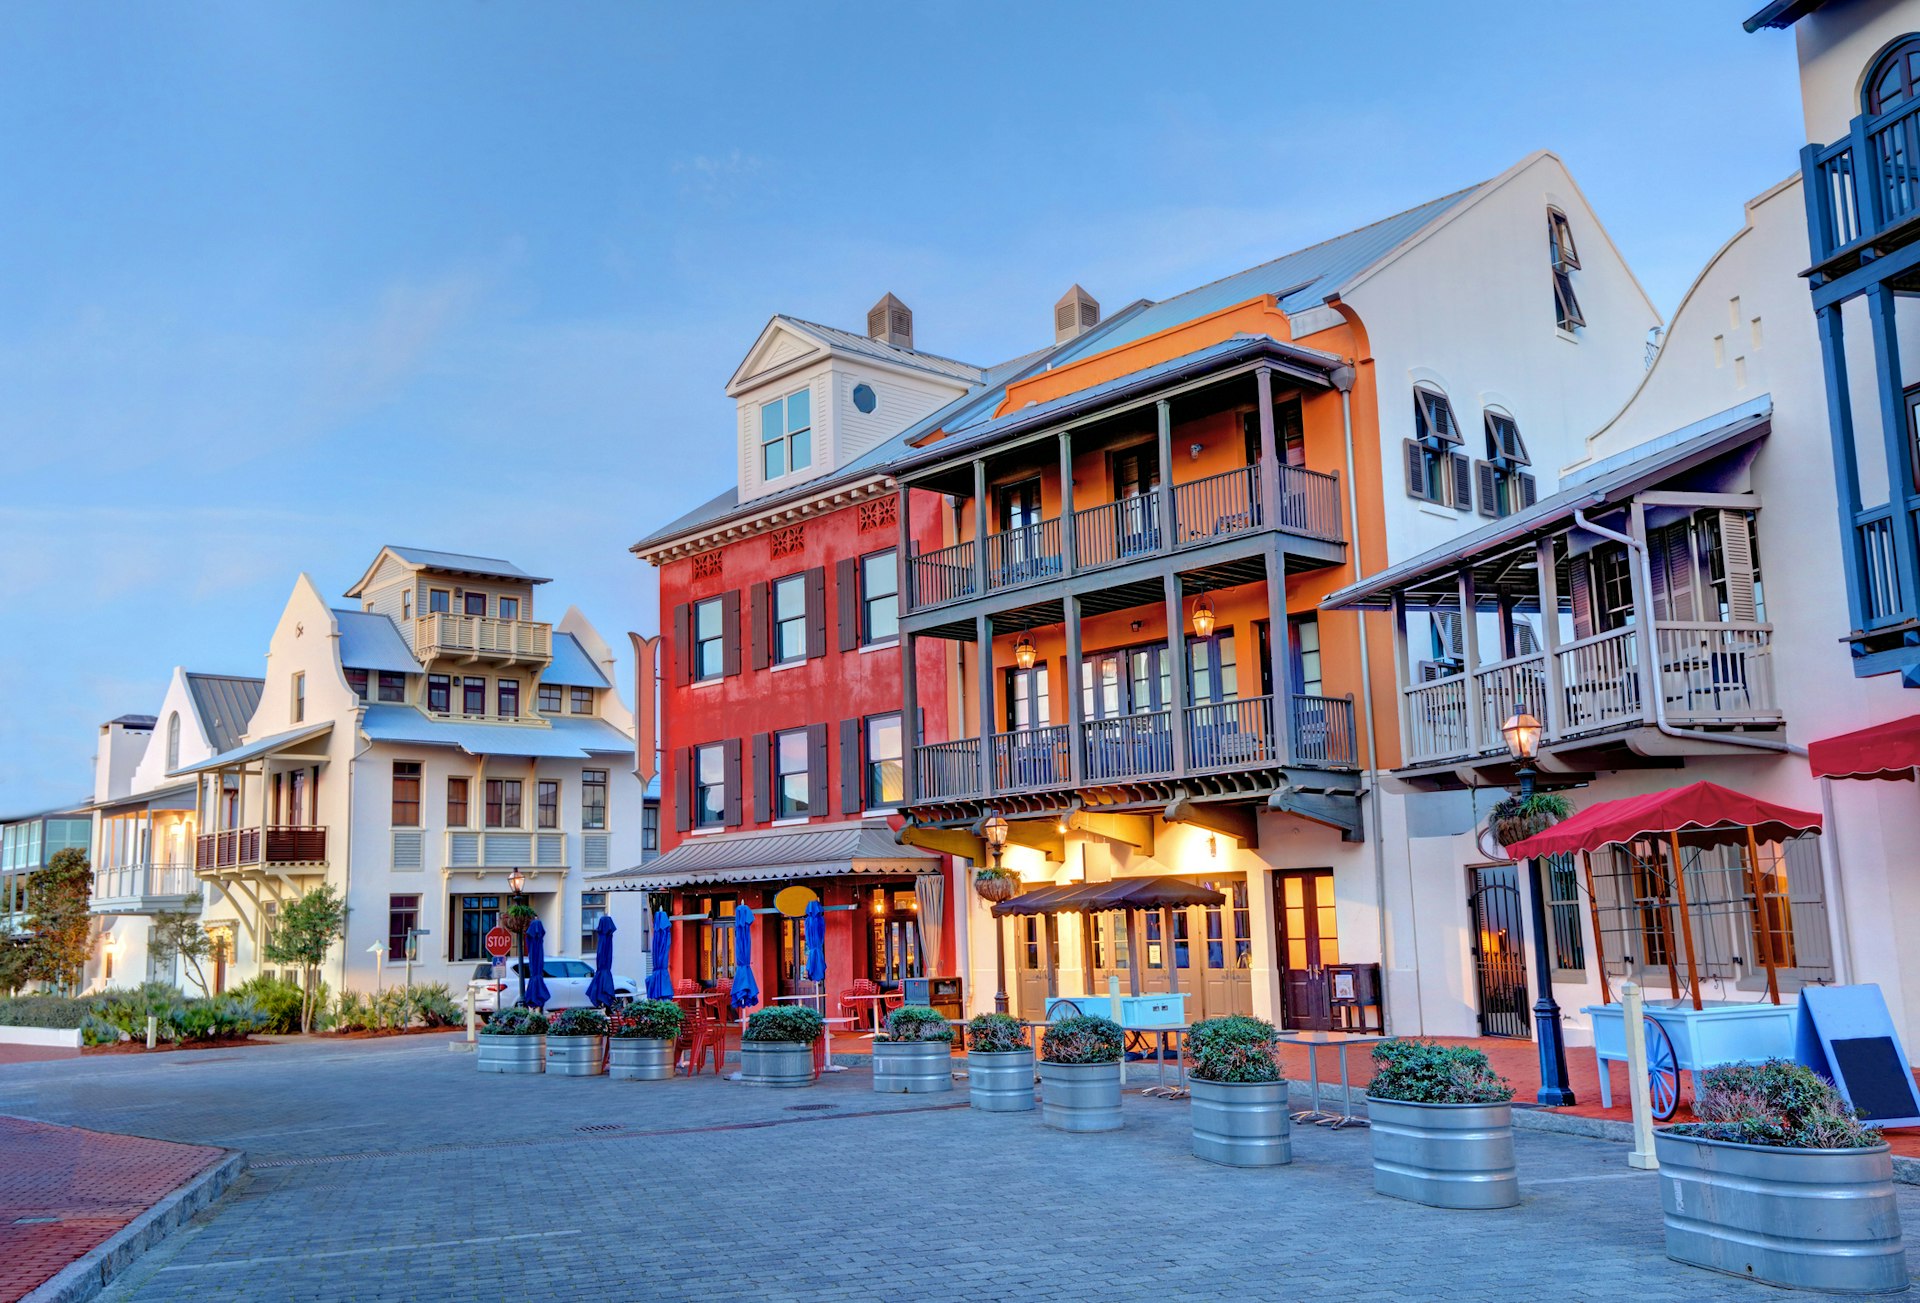 Colorful streetscape view of Rosemary Beach, FL